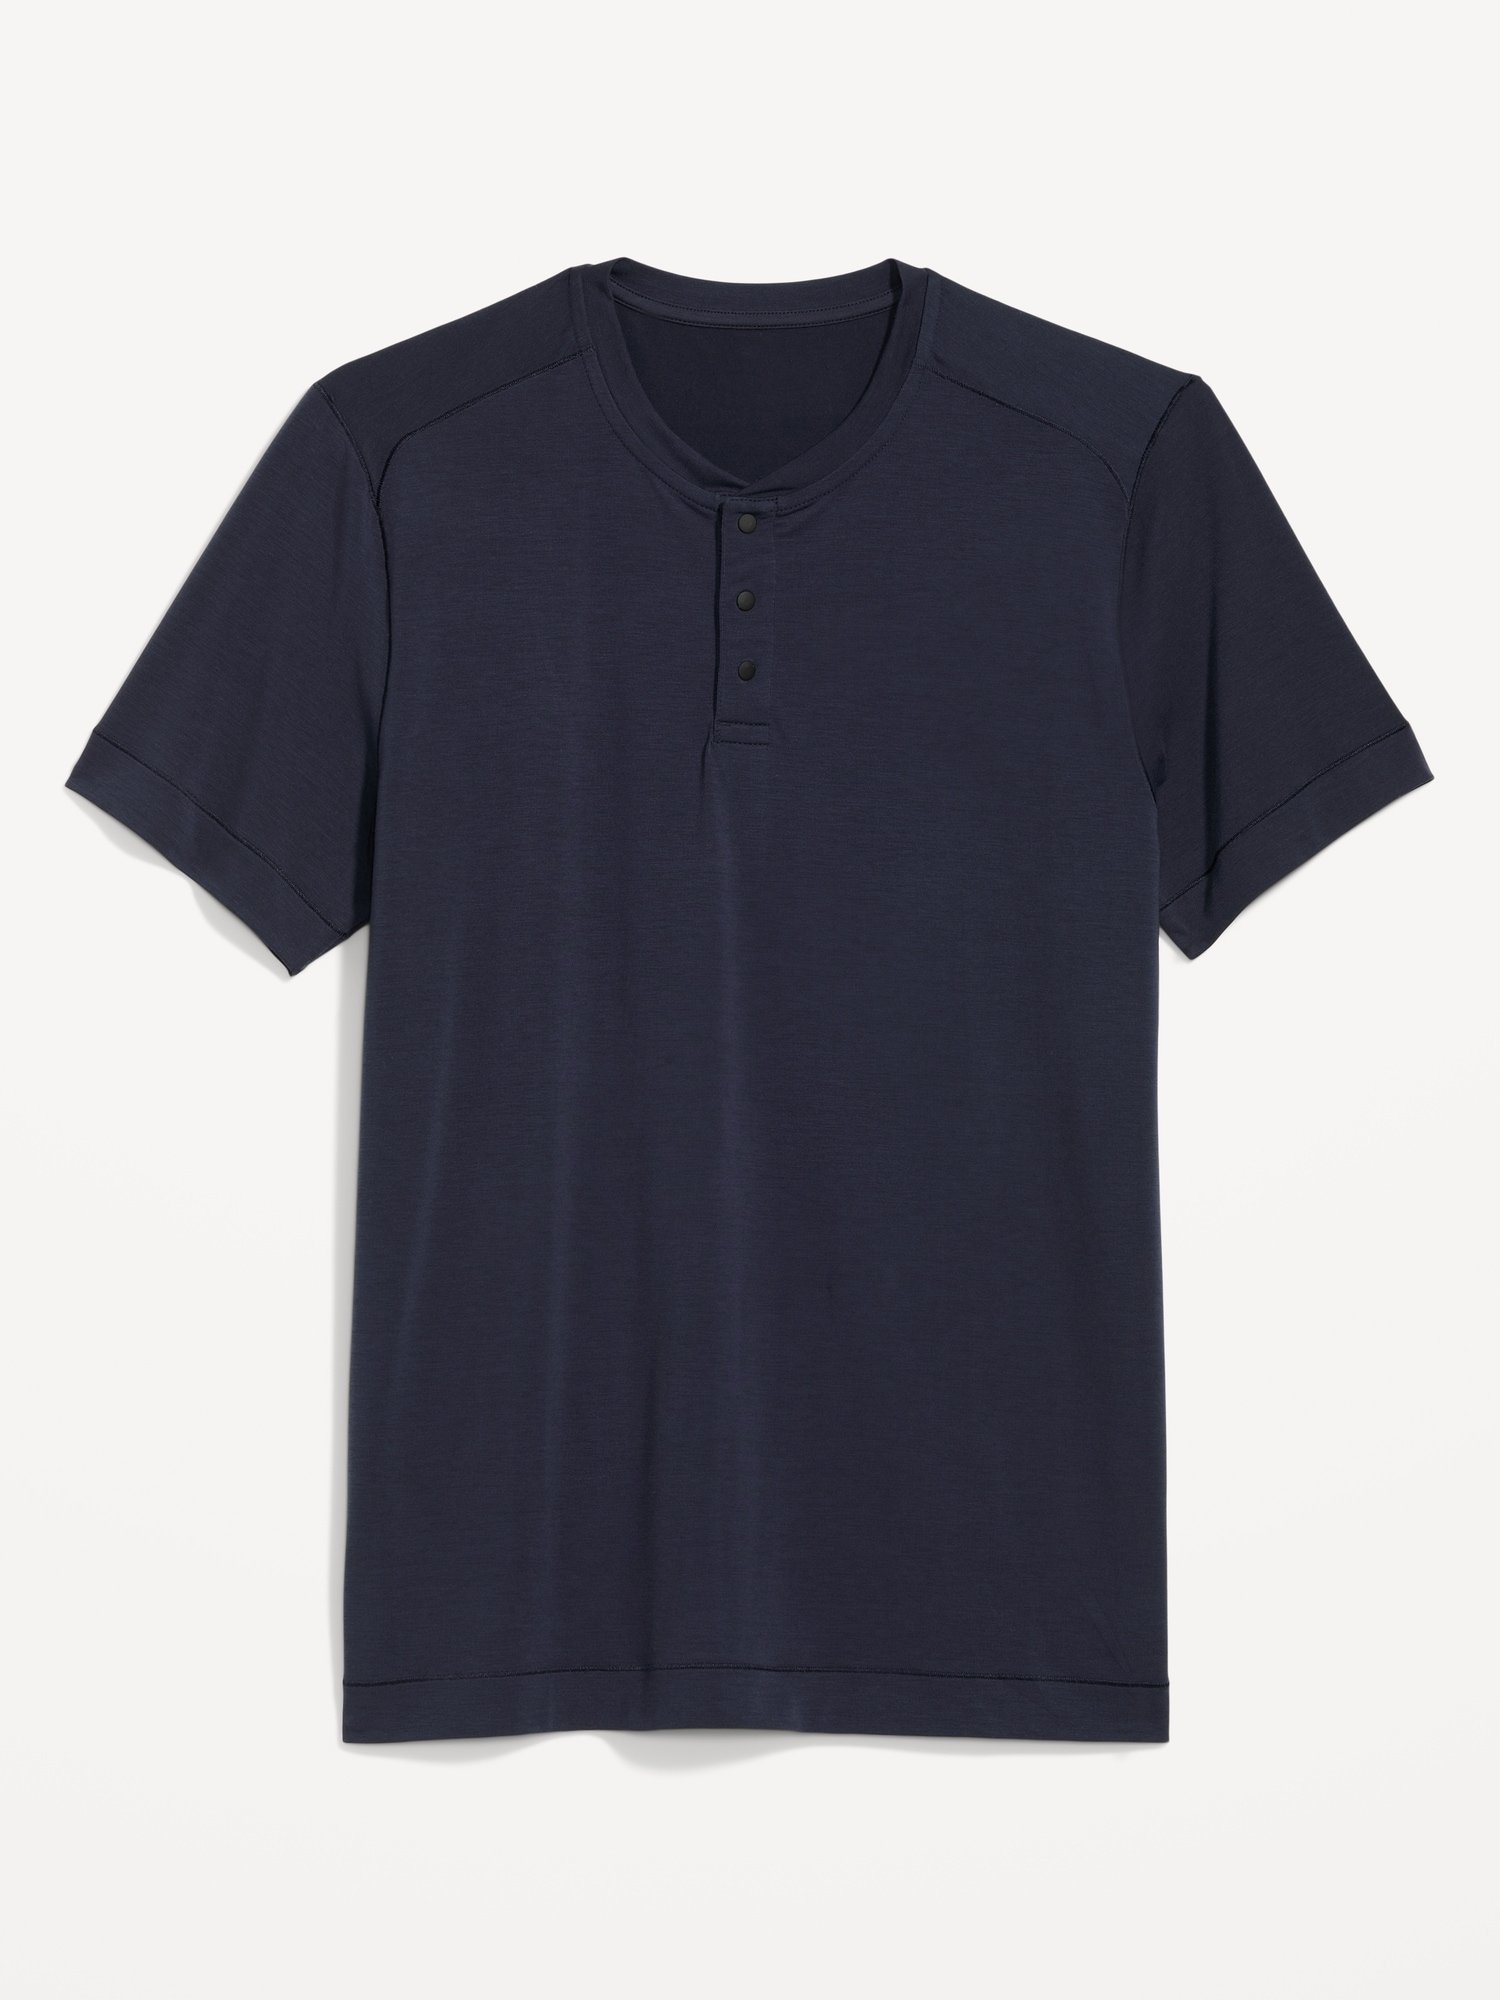 ONLINE EXCLUSIVE_Beyond 4-Way Stretch Henley T-Shirt for Men_InTheNavy_1450.jpeg